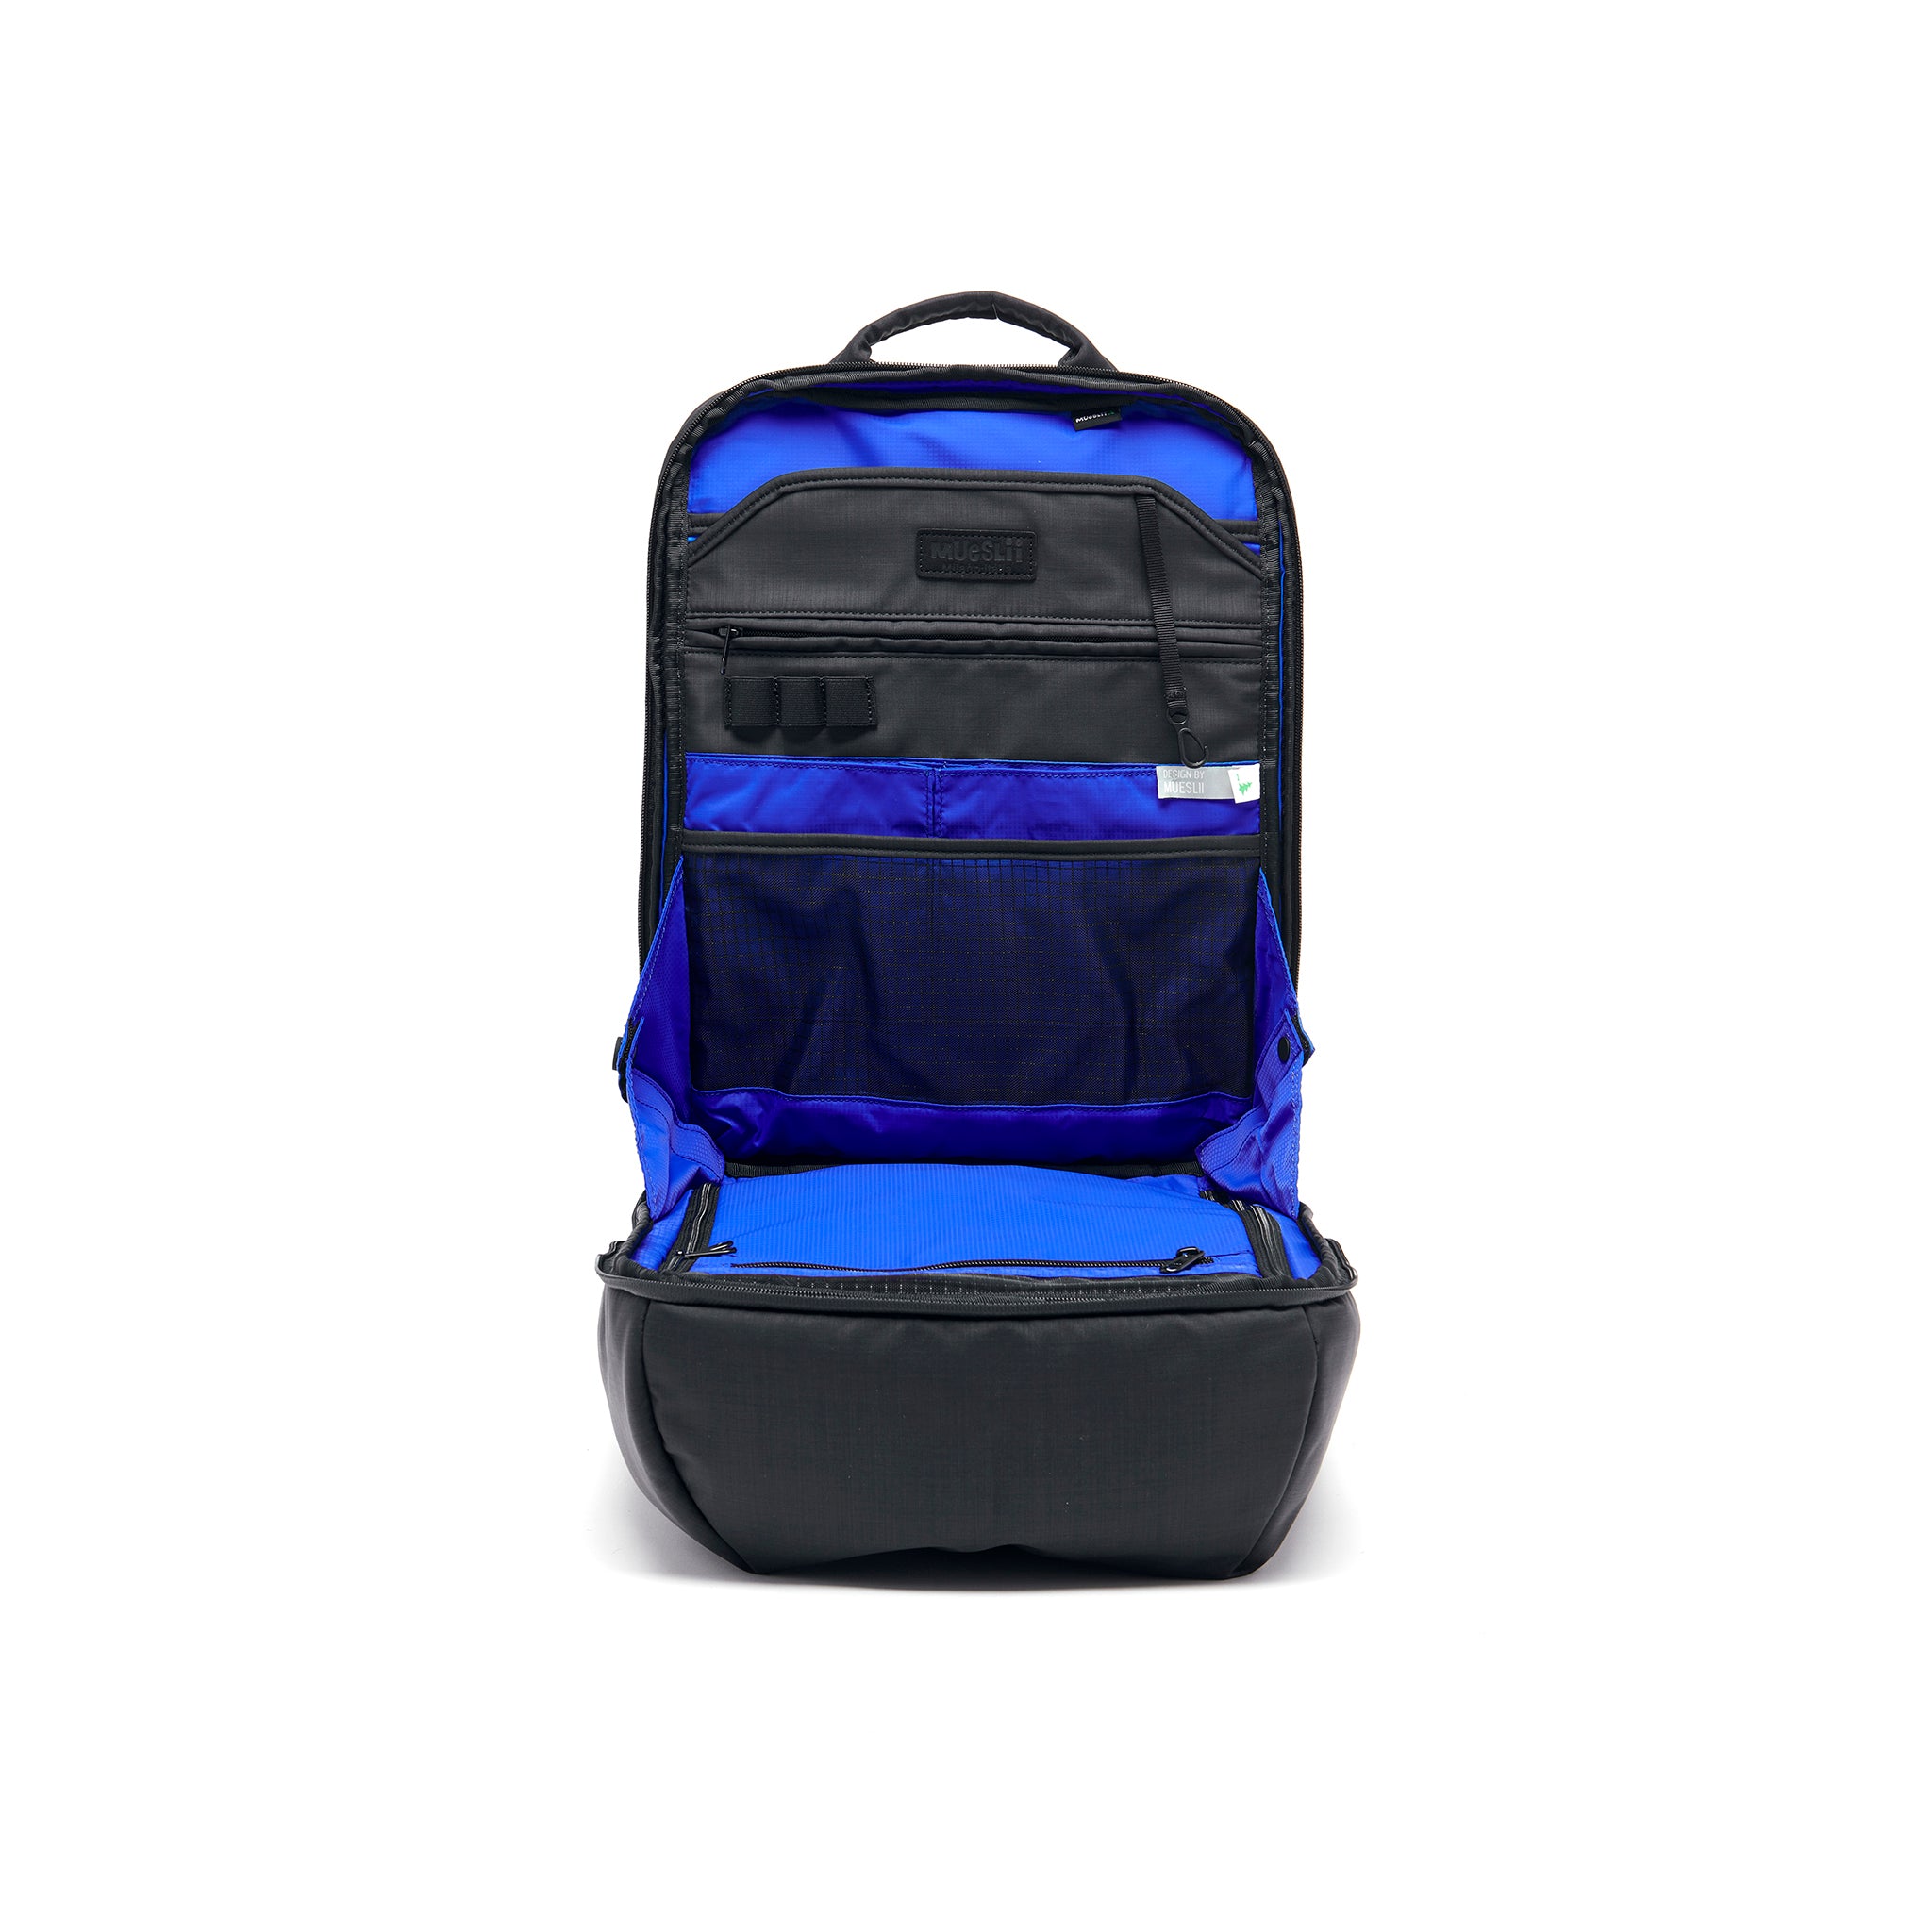 Mueslii travel backpack, made of water resistant canvas nylon, with a laptop compartment, cabin luggage, color black, inside view.